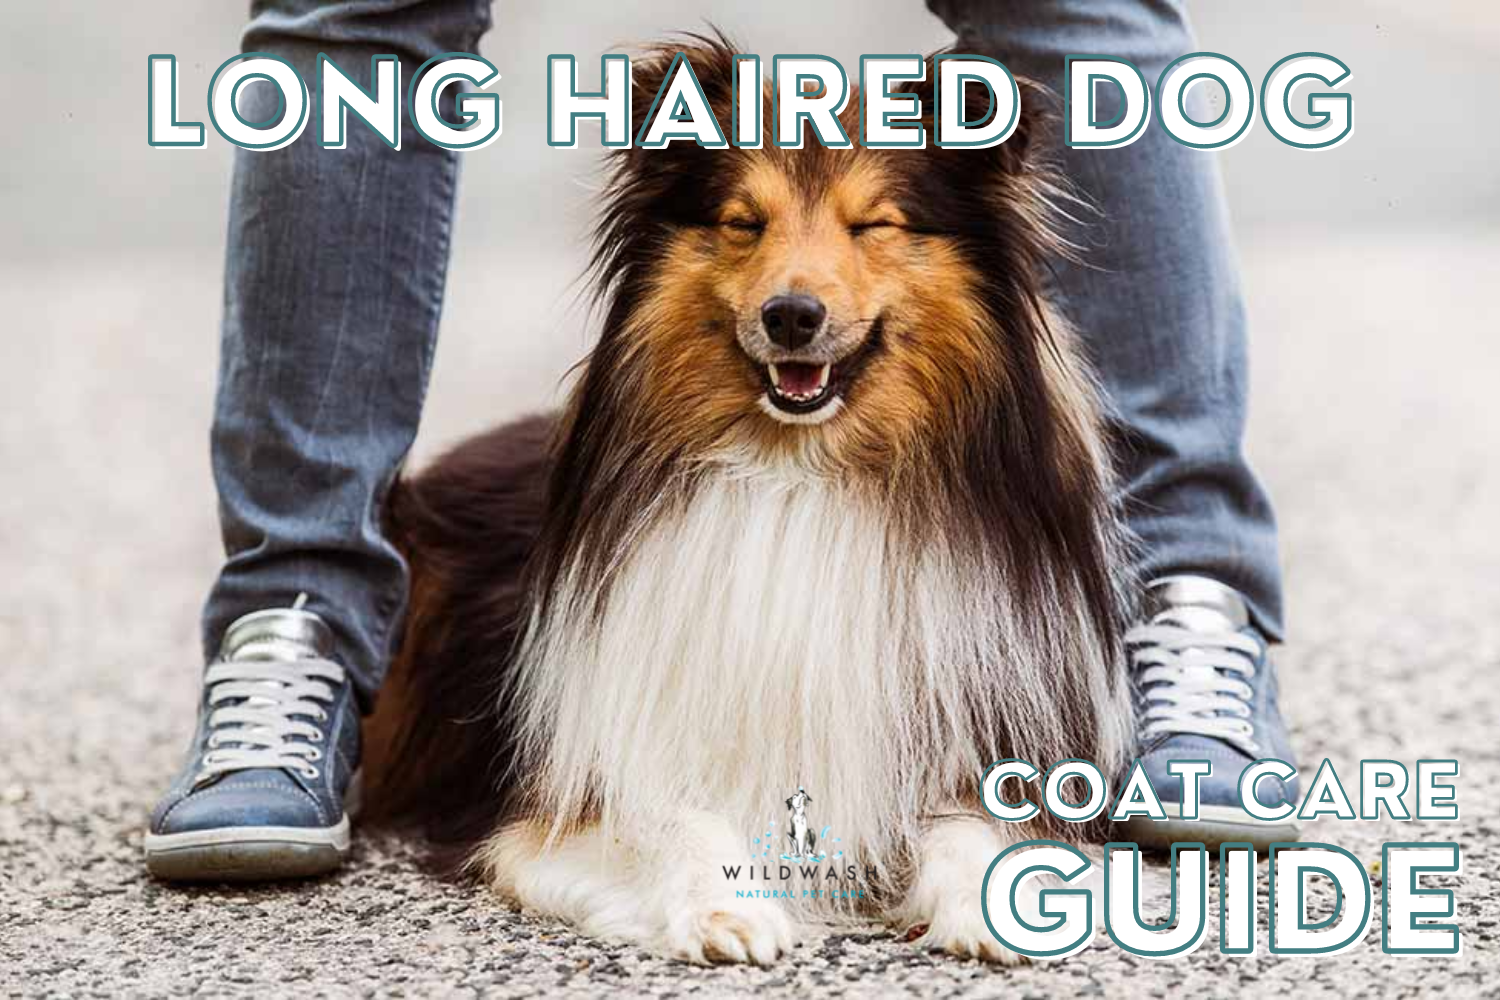 long haired dog coat care guide